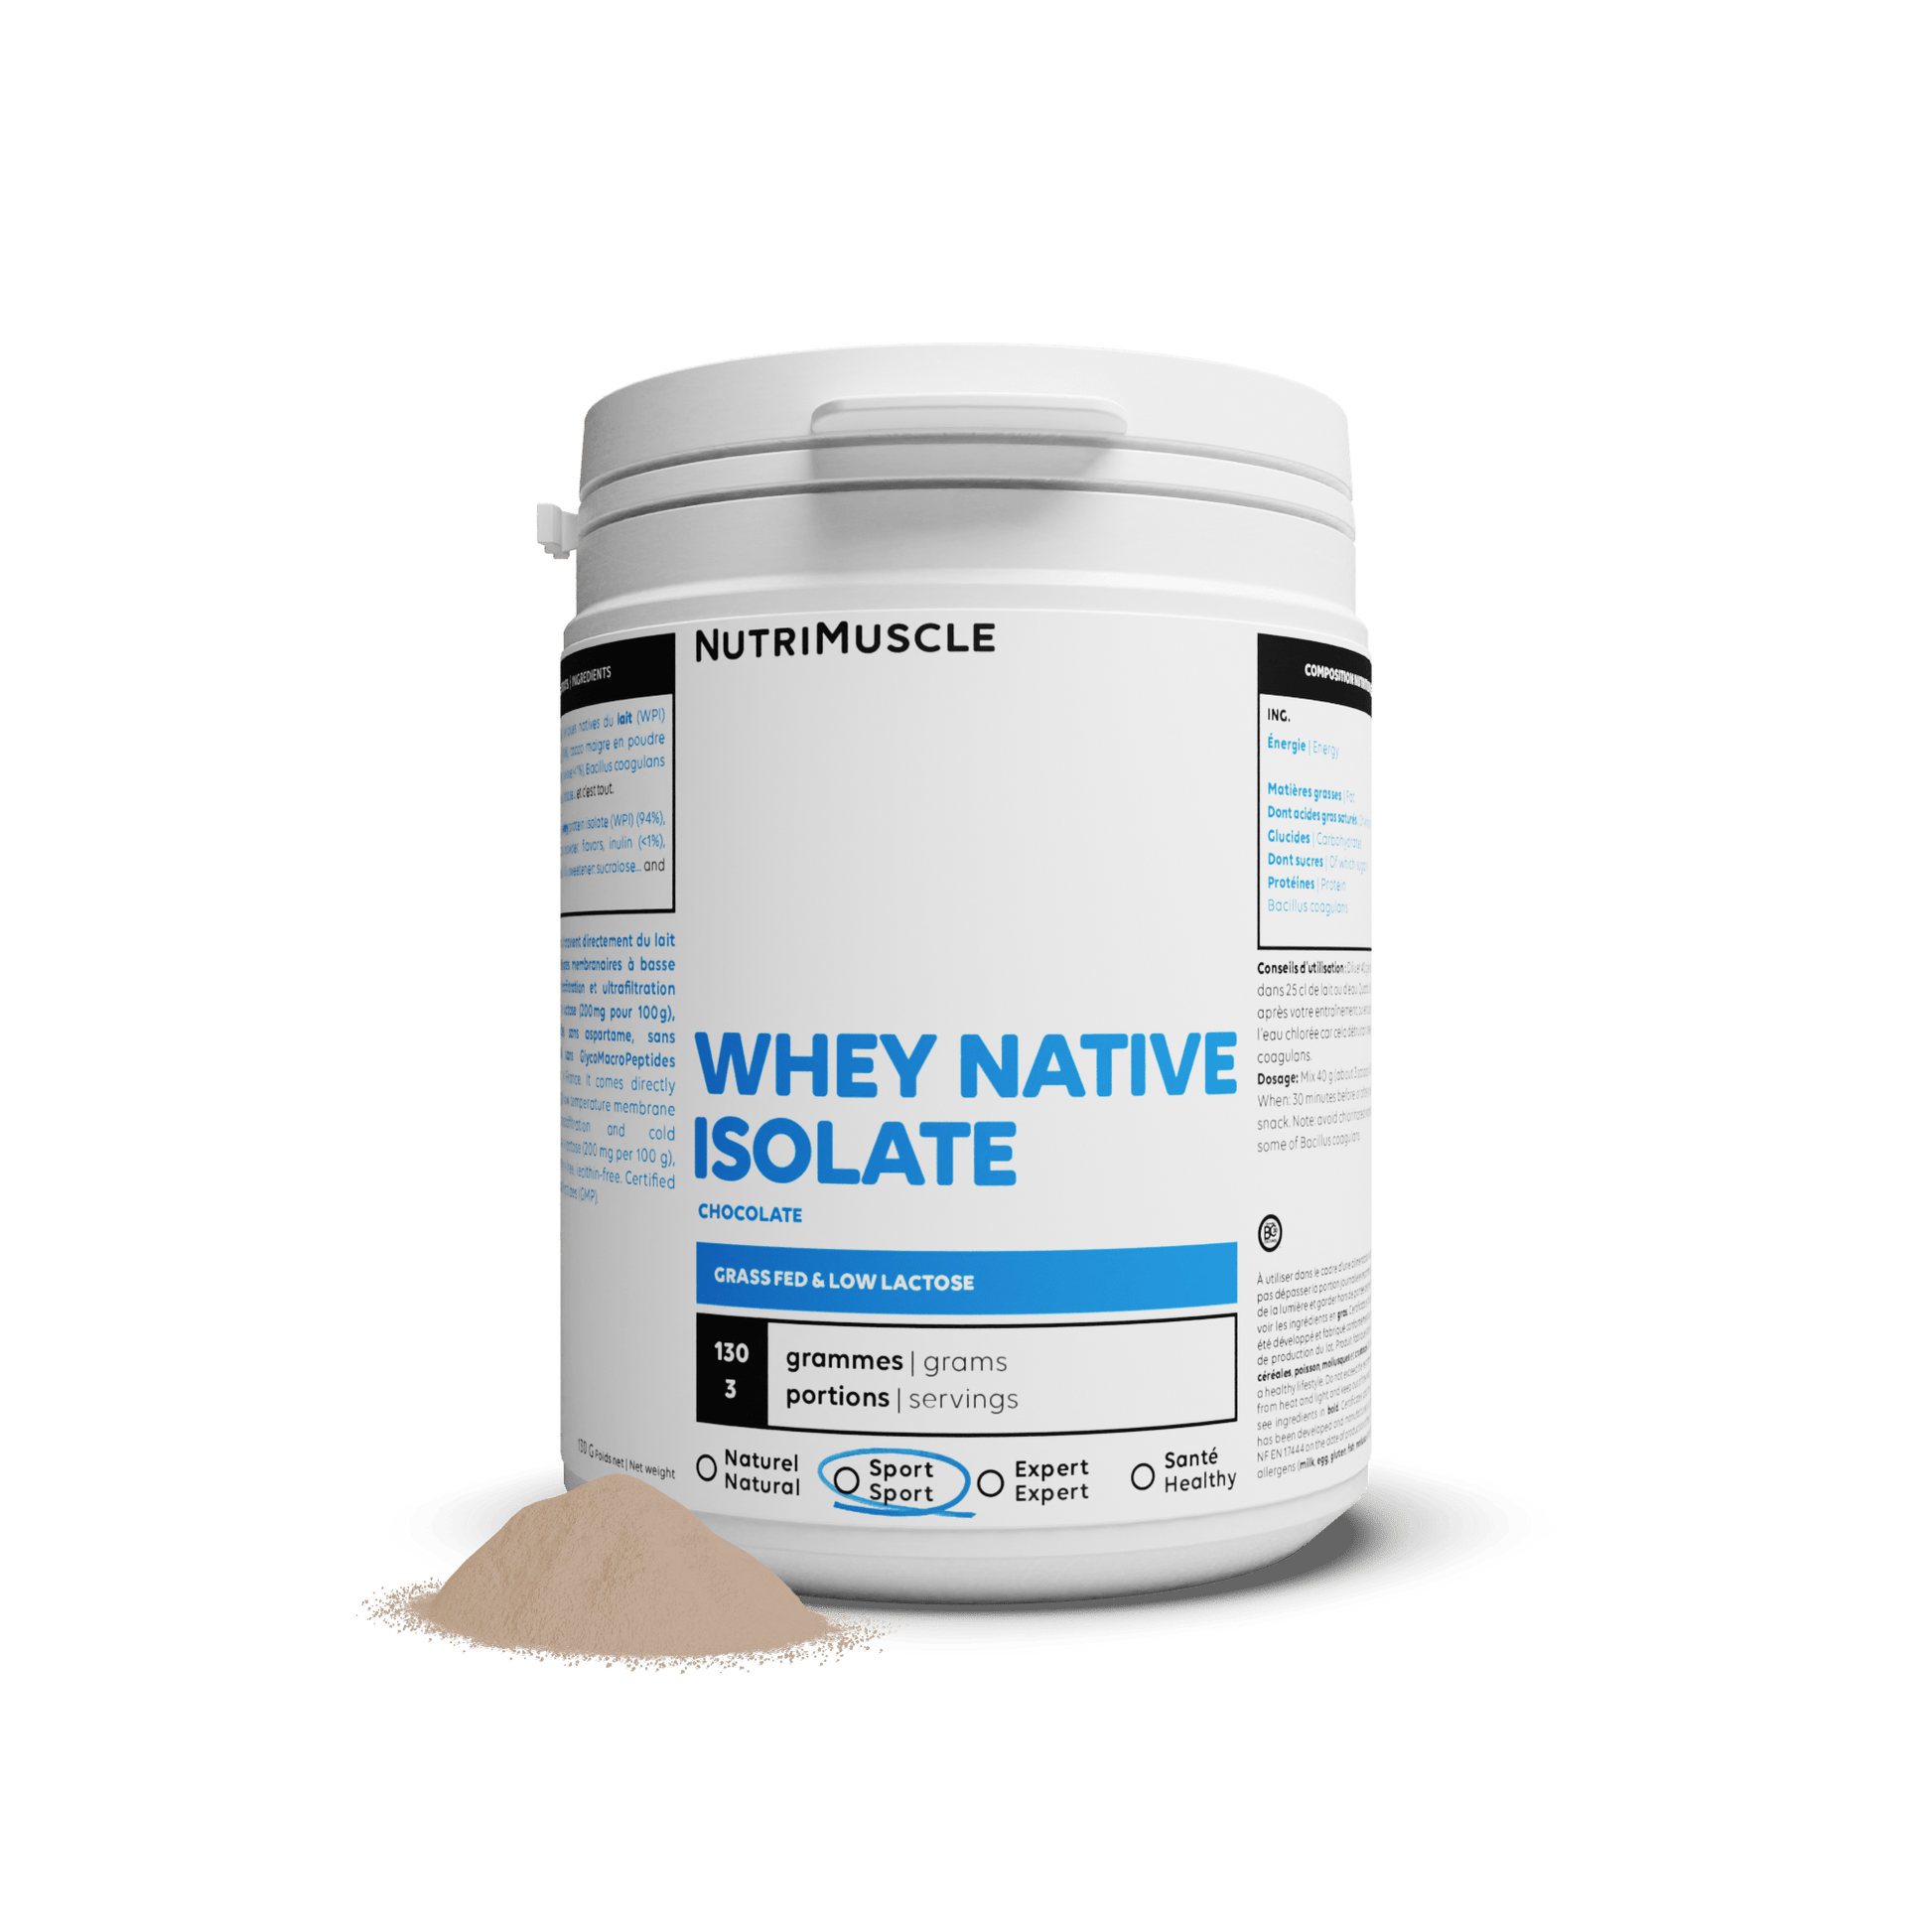 Nutrimuscle Protéines Chocolat / 130 g Whey Native Isolate (Low lactose)